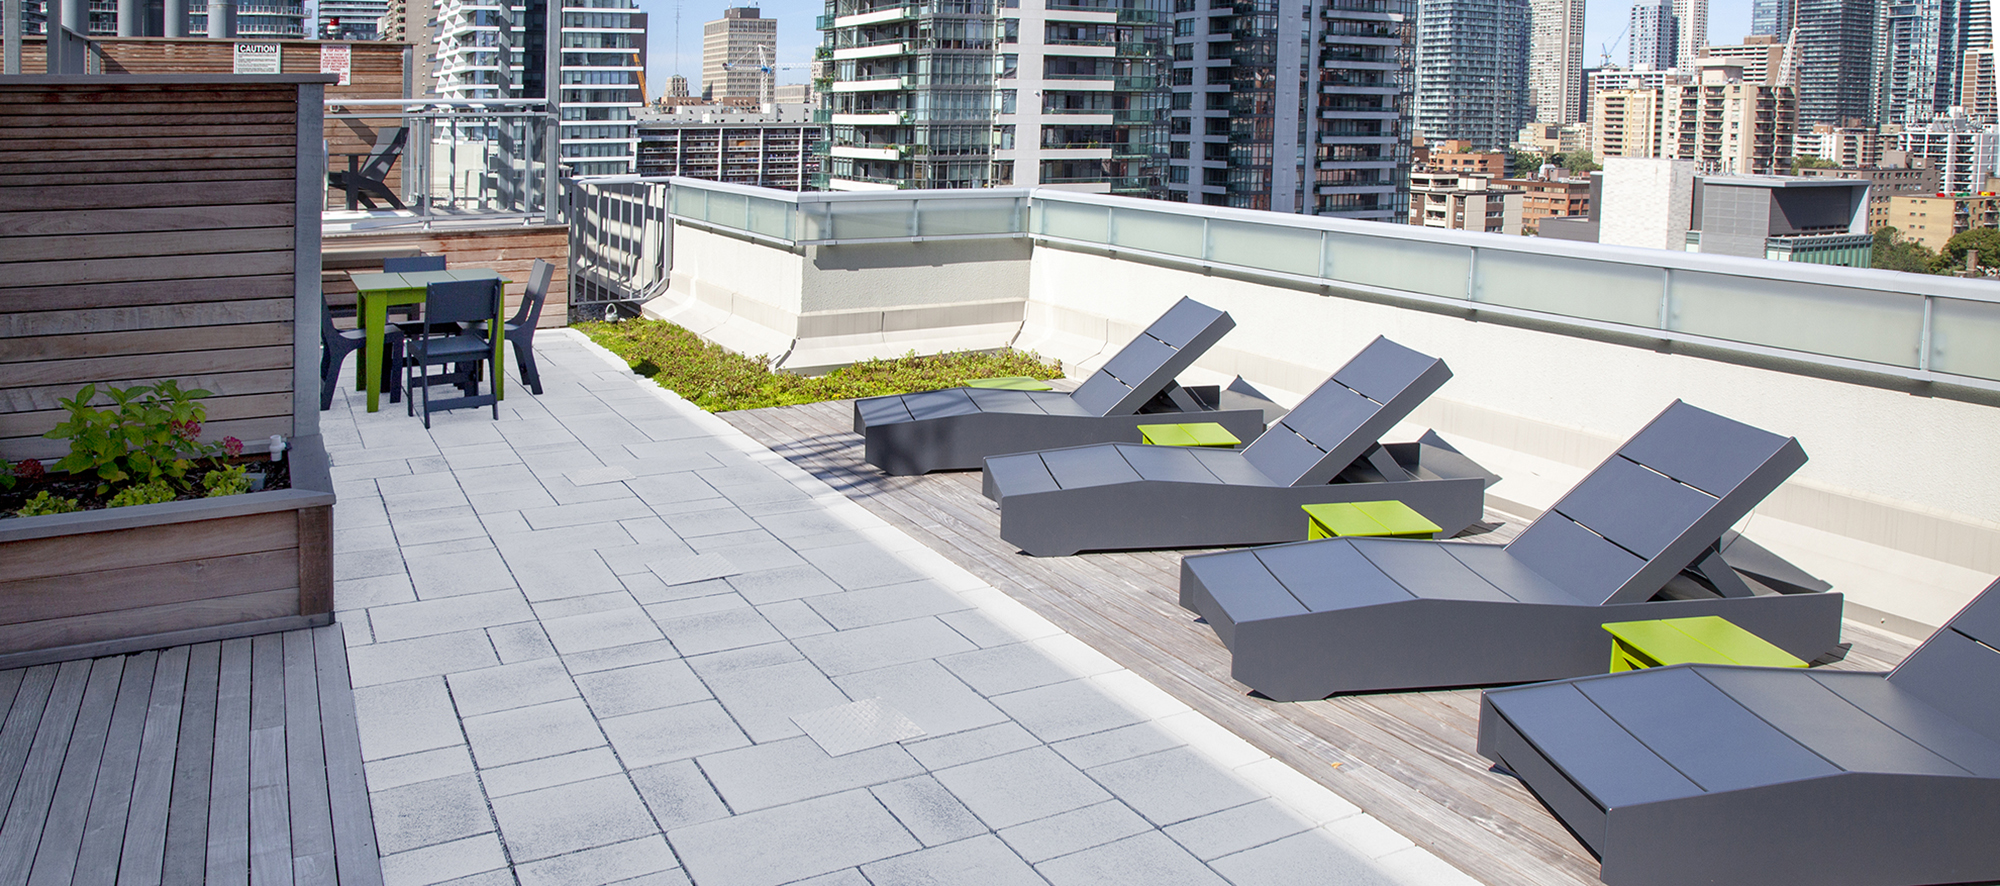 The roof deck at 130 Carlton, Toronto features grey speckled, Umbriano Winter Marvel pavers by Unilock and a view of the Toronto skyline.